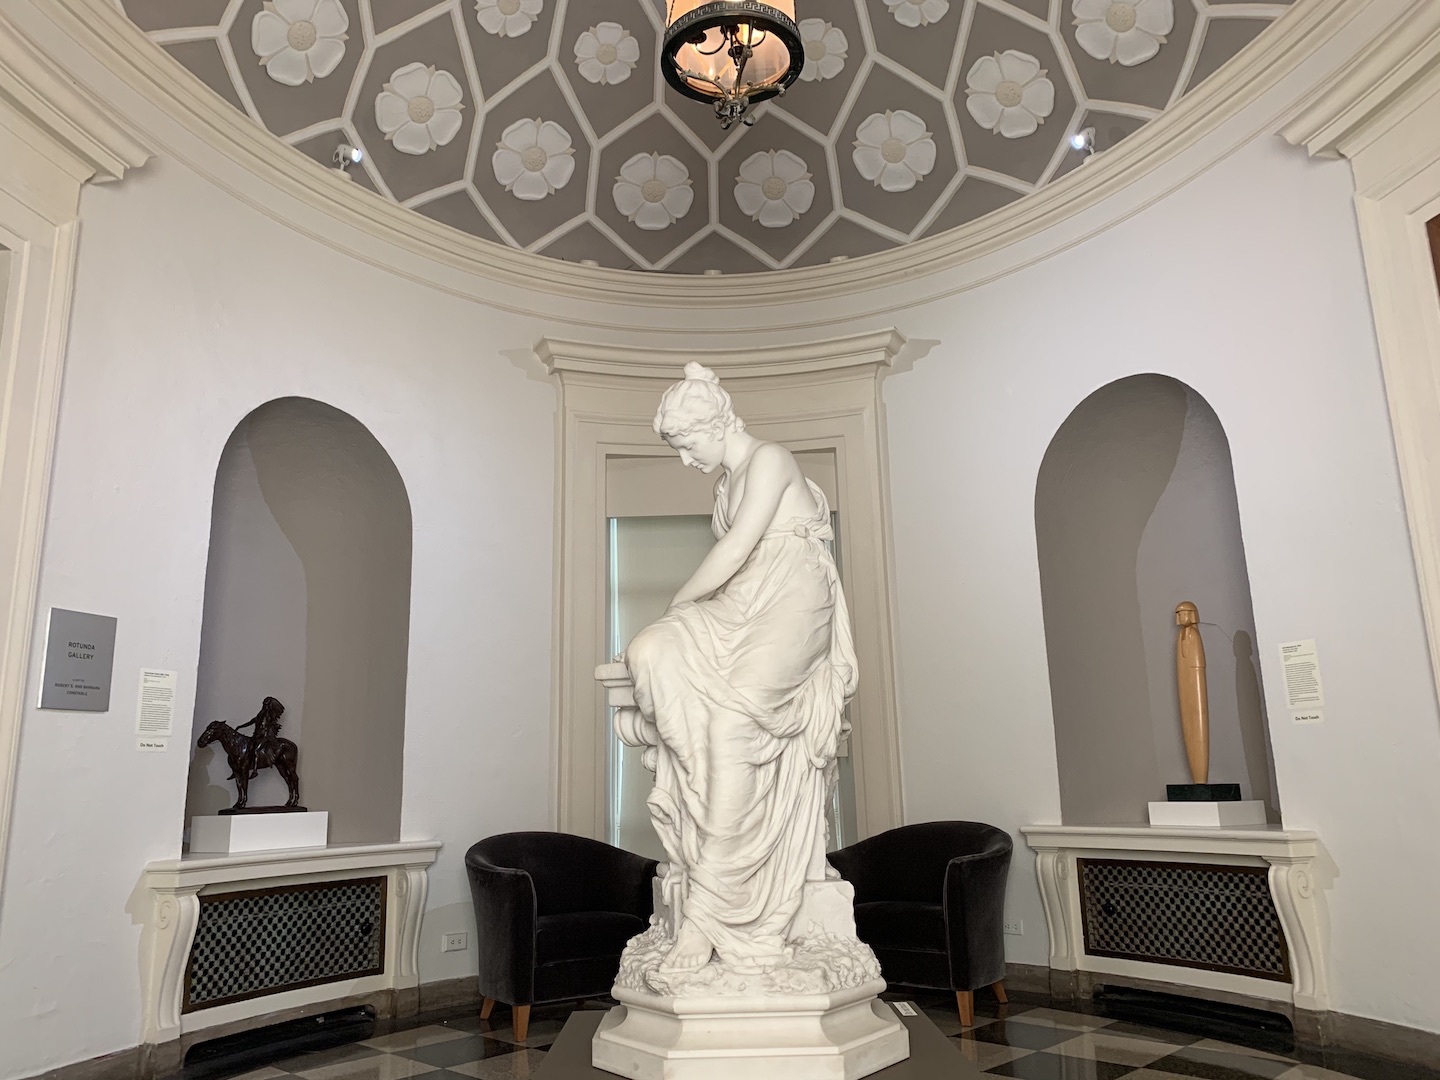 The rotunda gallery at MM, a small round gallery. In the center is a marble sculture showing a woman creating a crown out of olive branches. 